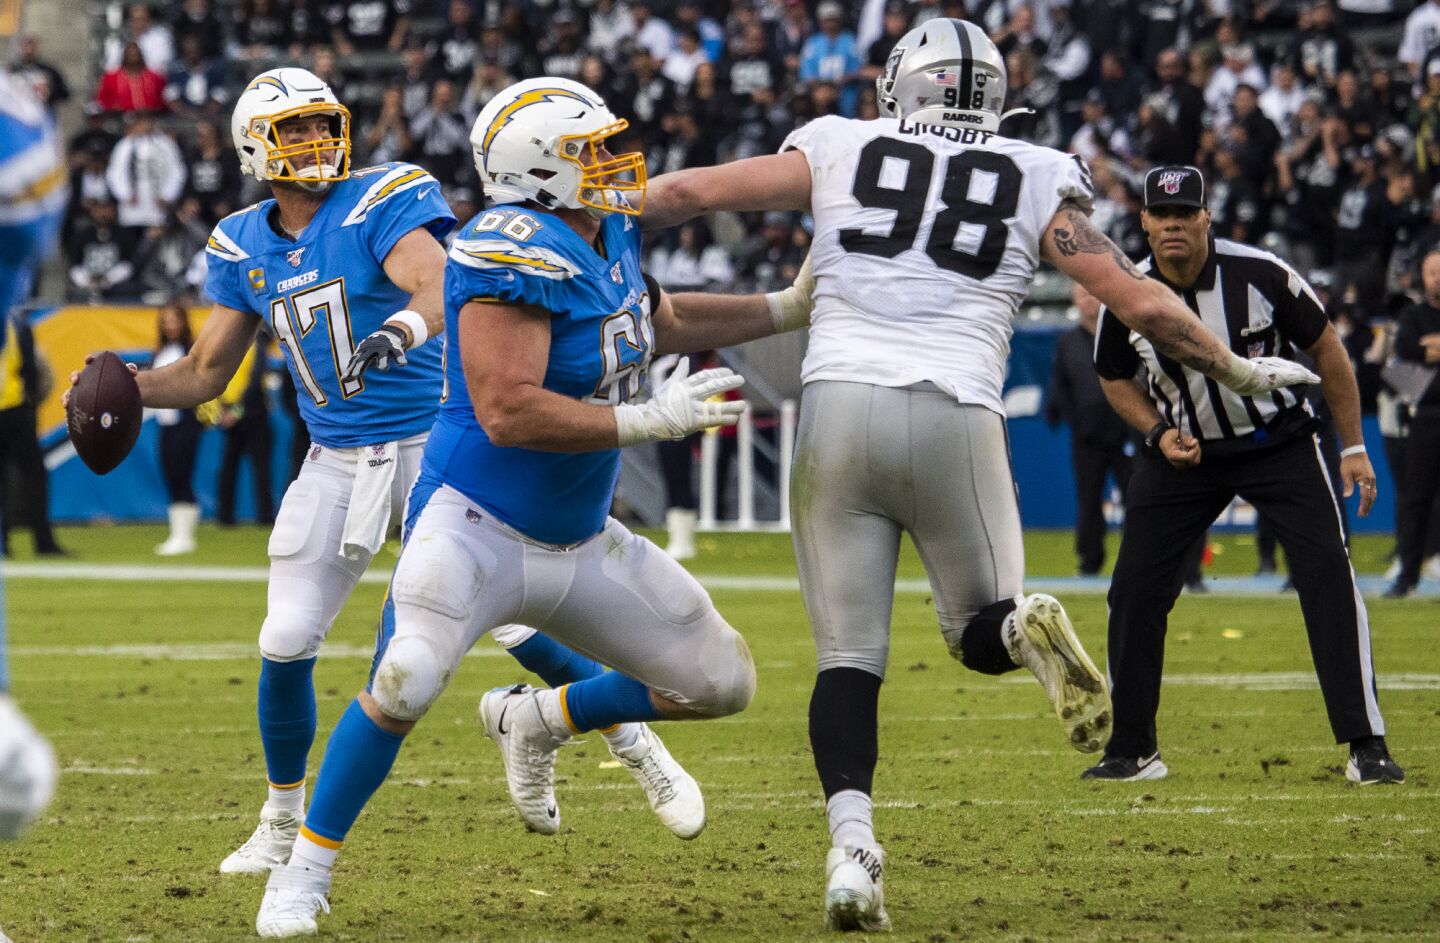 Chargers quarterback Philip Rivers looks to pass against the Oakland Raiders in the fourth quarter.